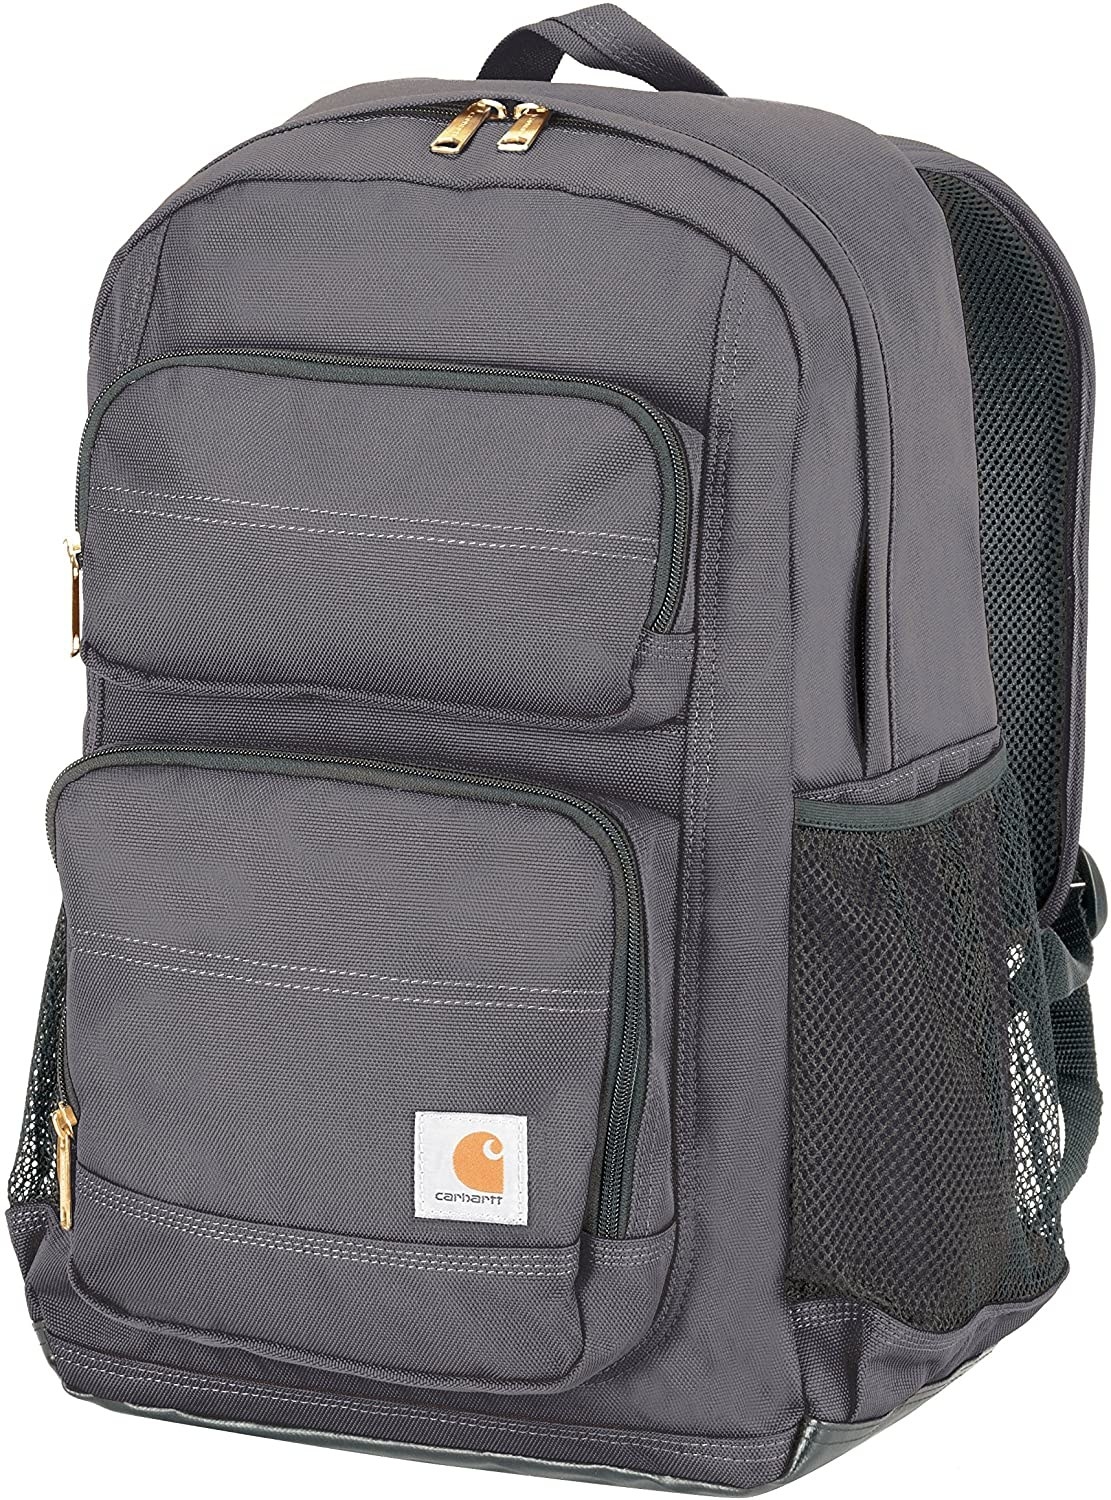 Gray Carhartt branded canvas backpack with several pockets.